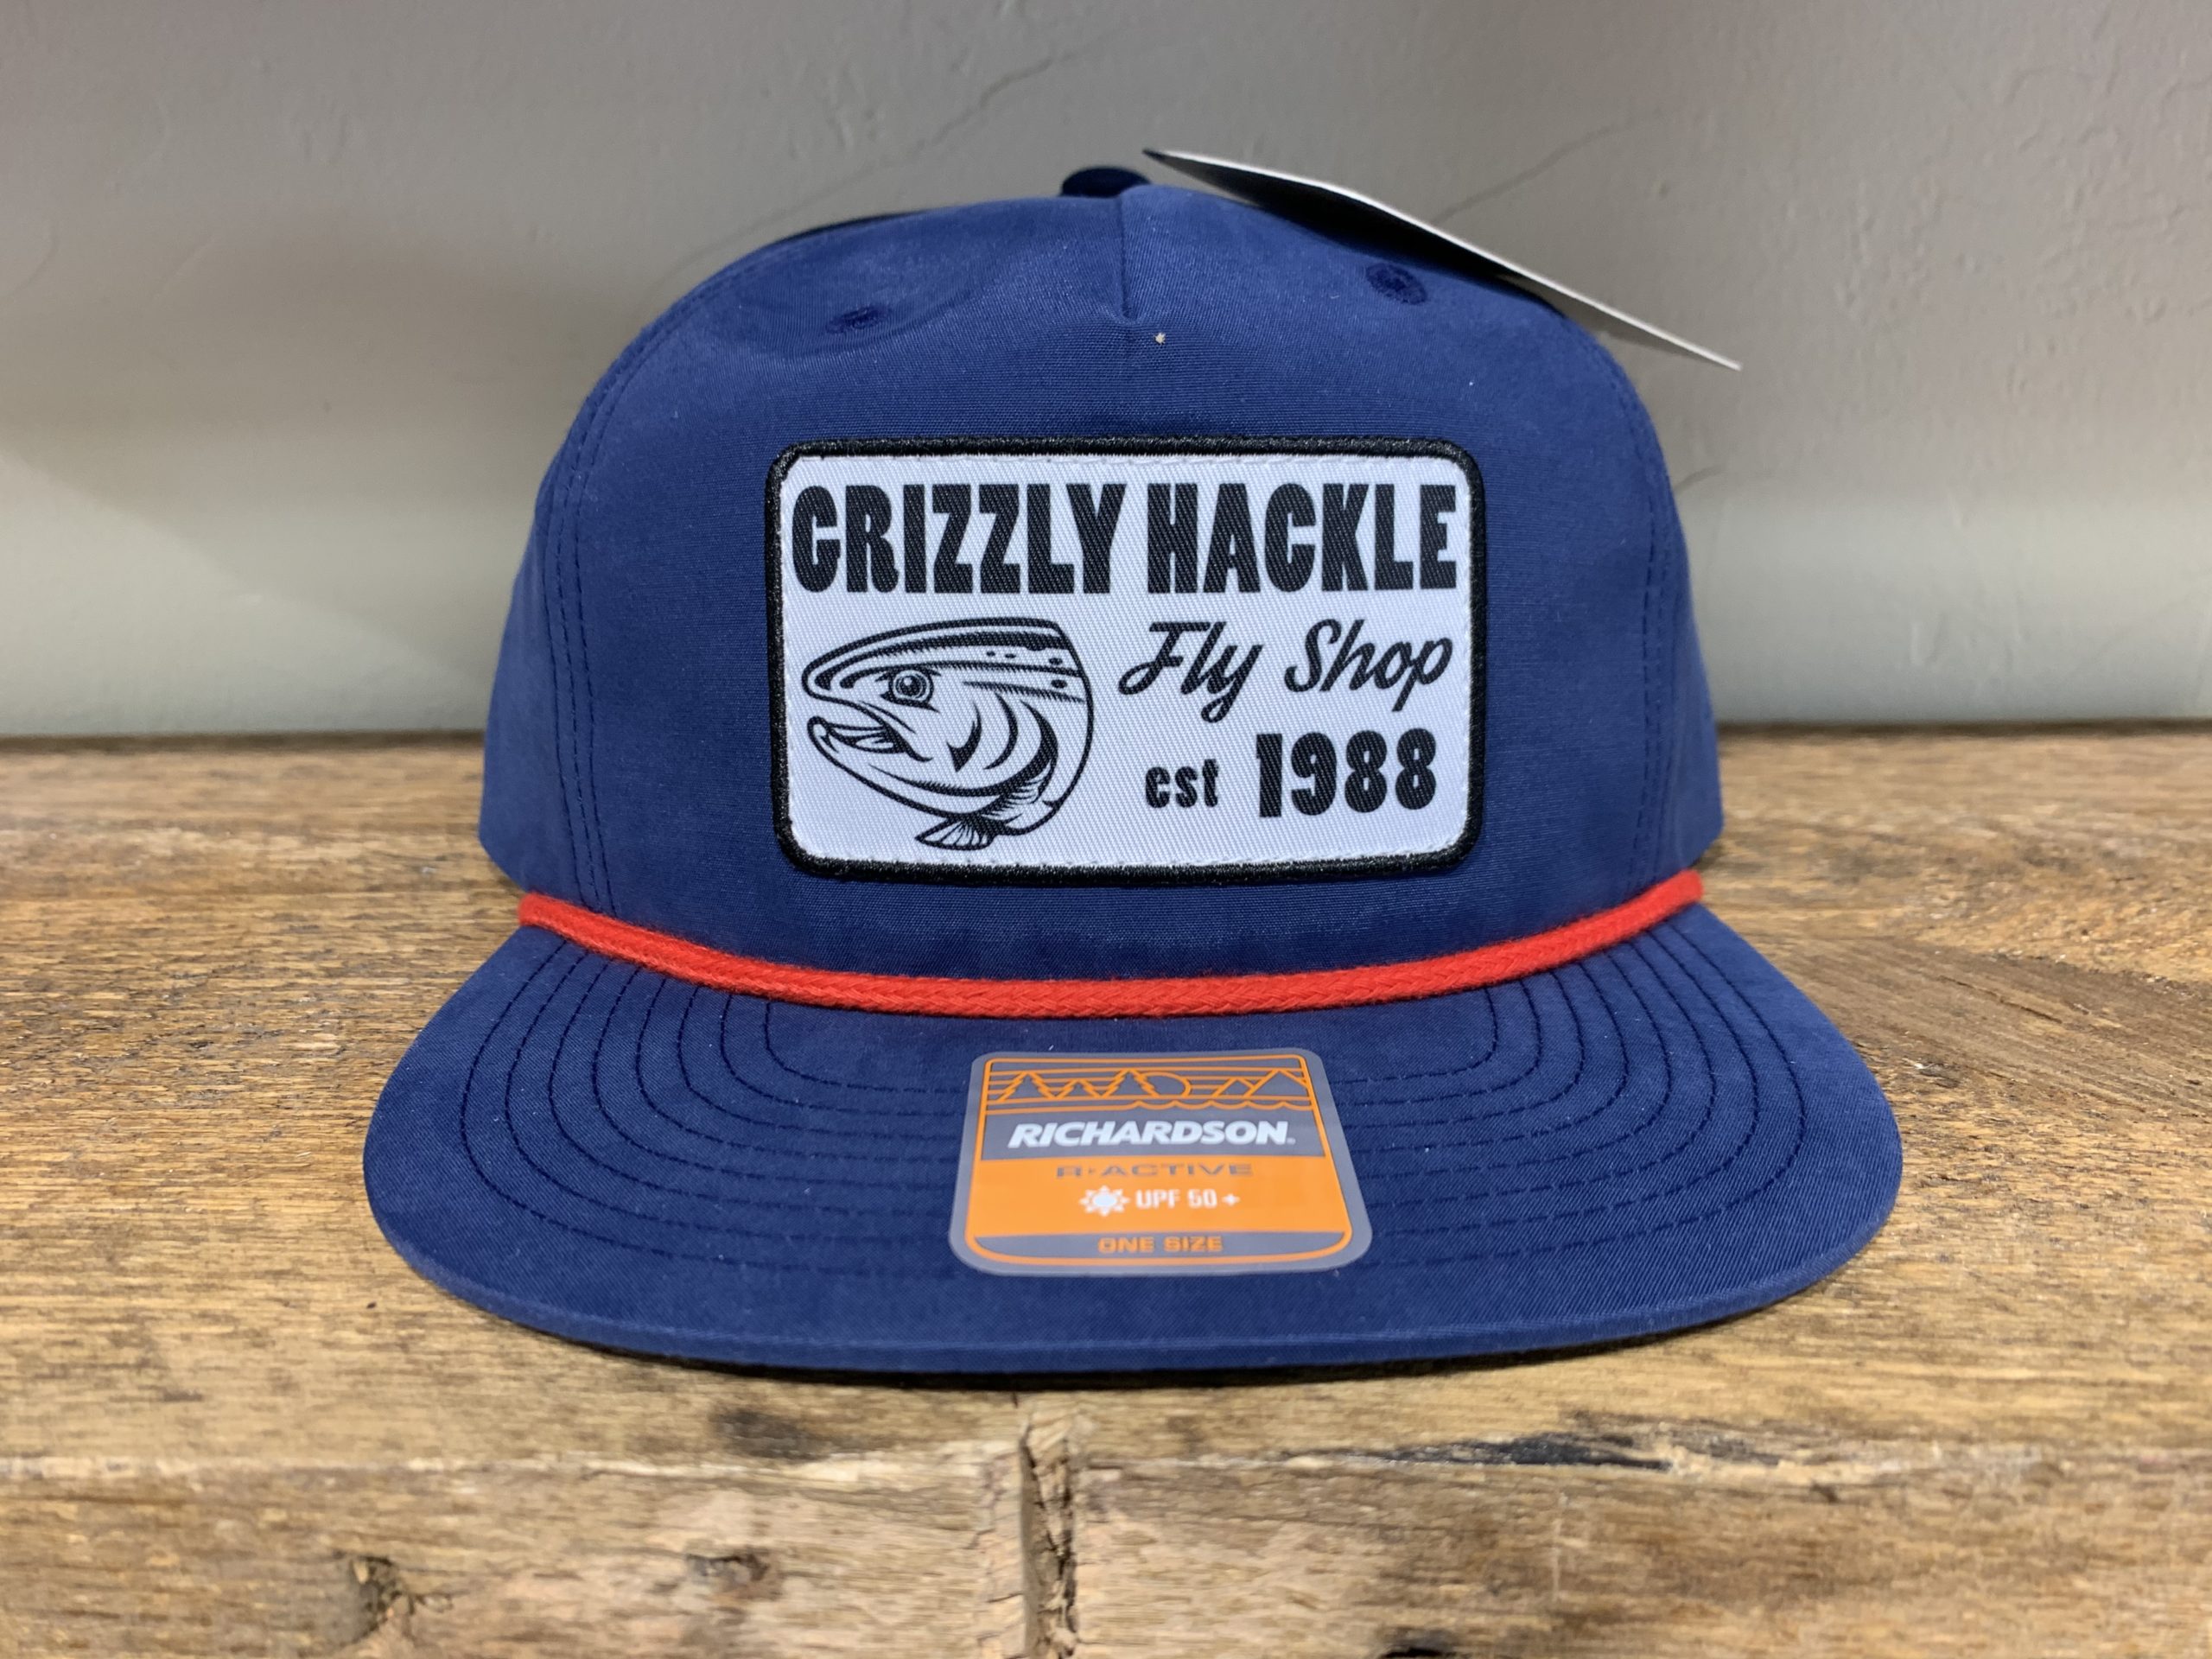 Grizzly Hackle Patch Vintage Hat - Est 1988 | The Grizzly Hackle